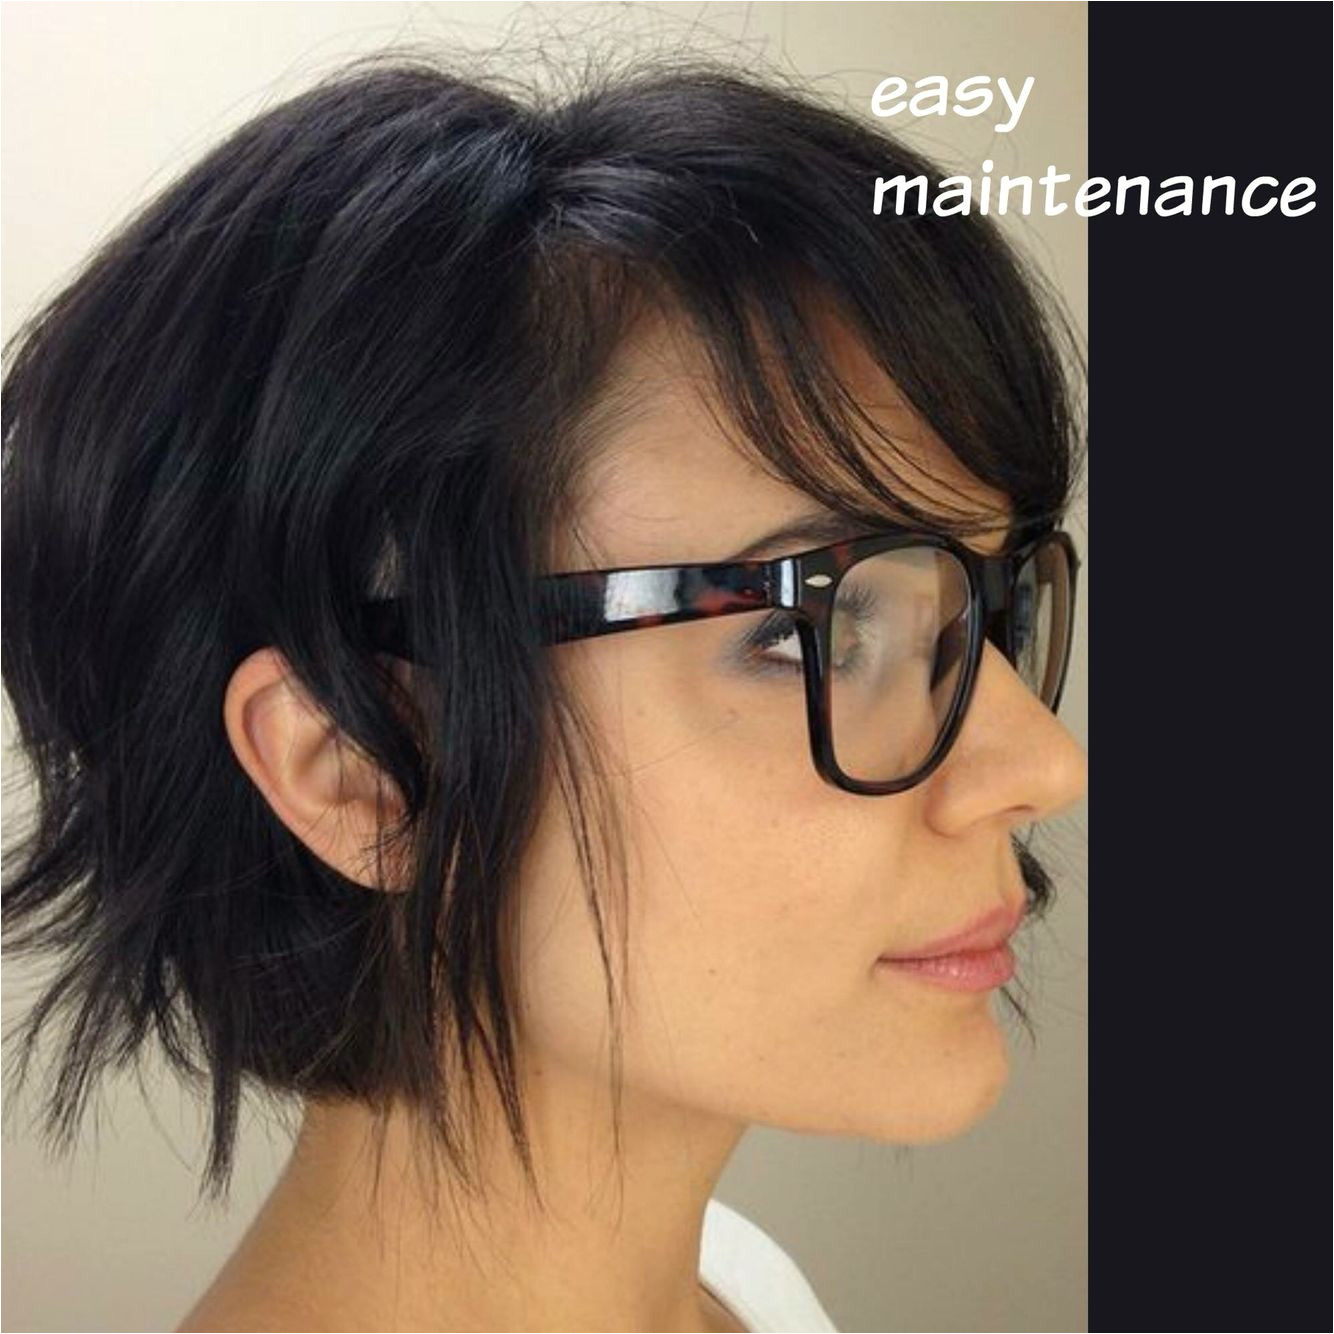 Easy to manage short haircut